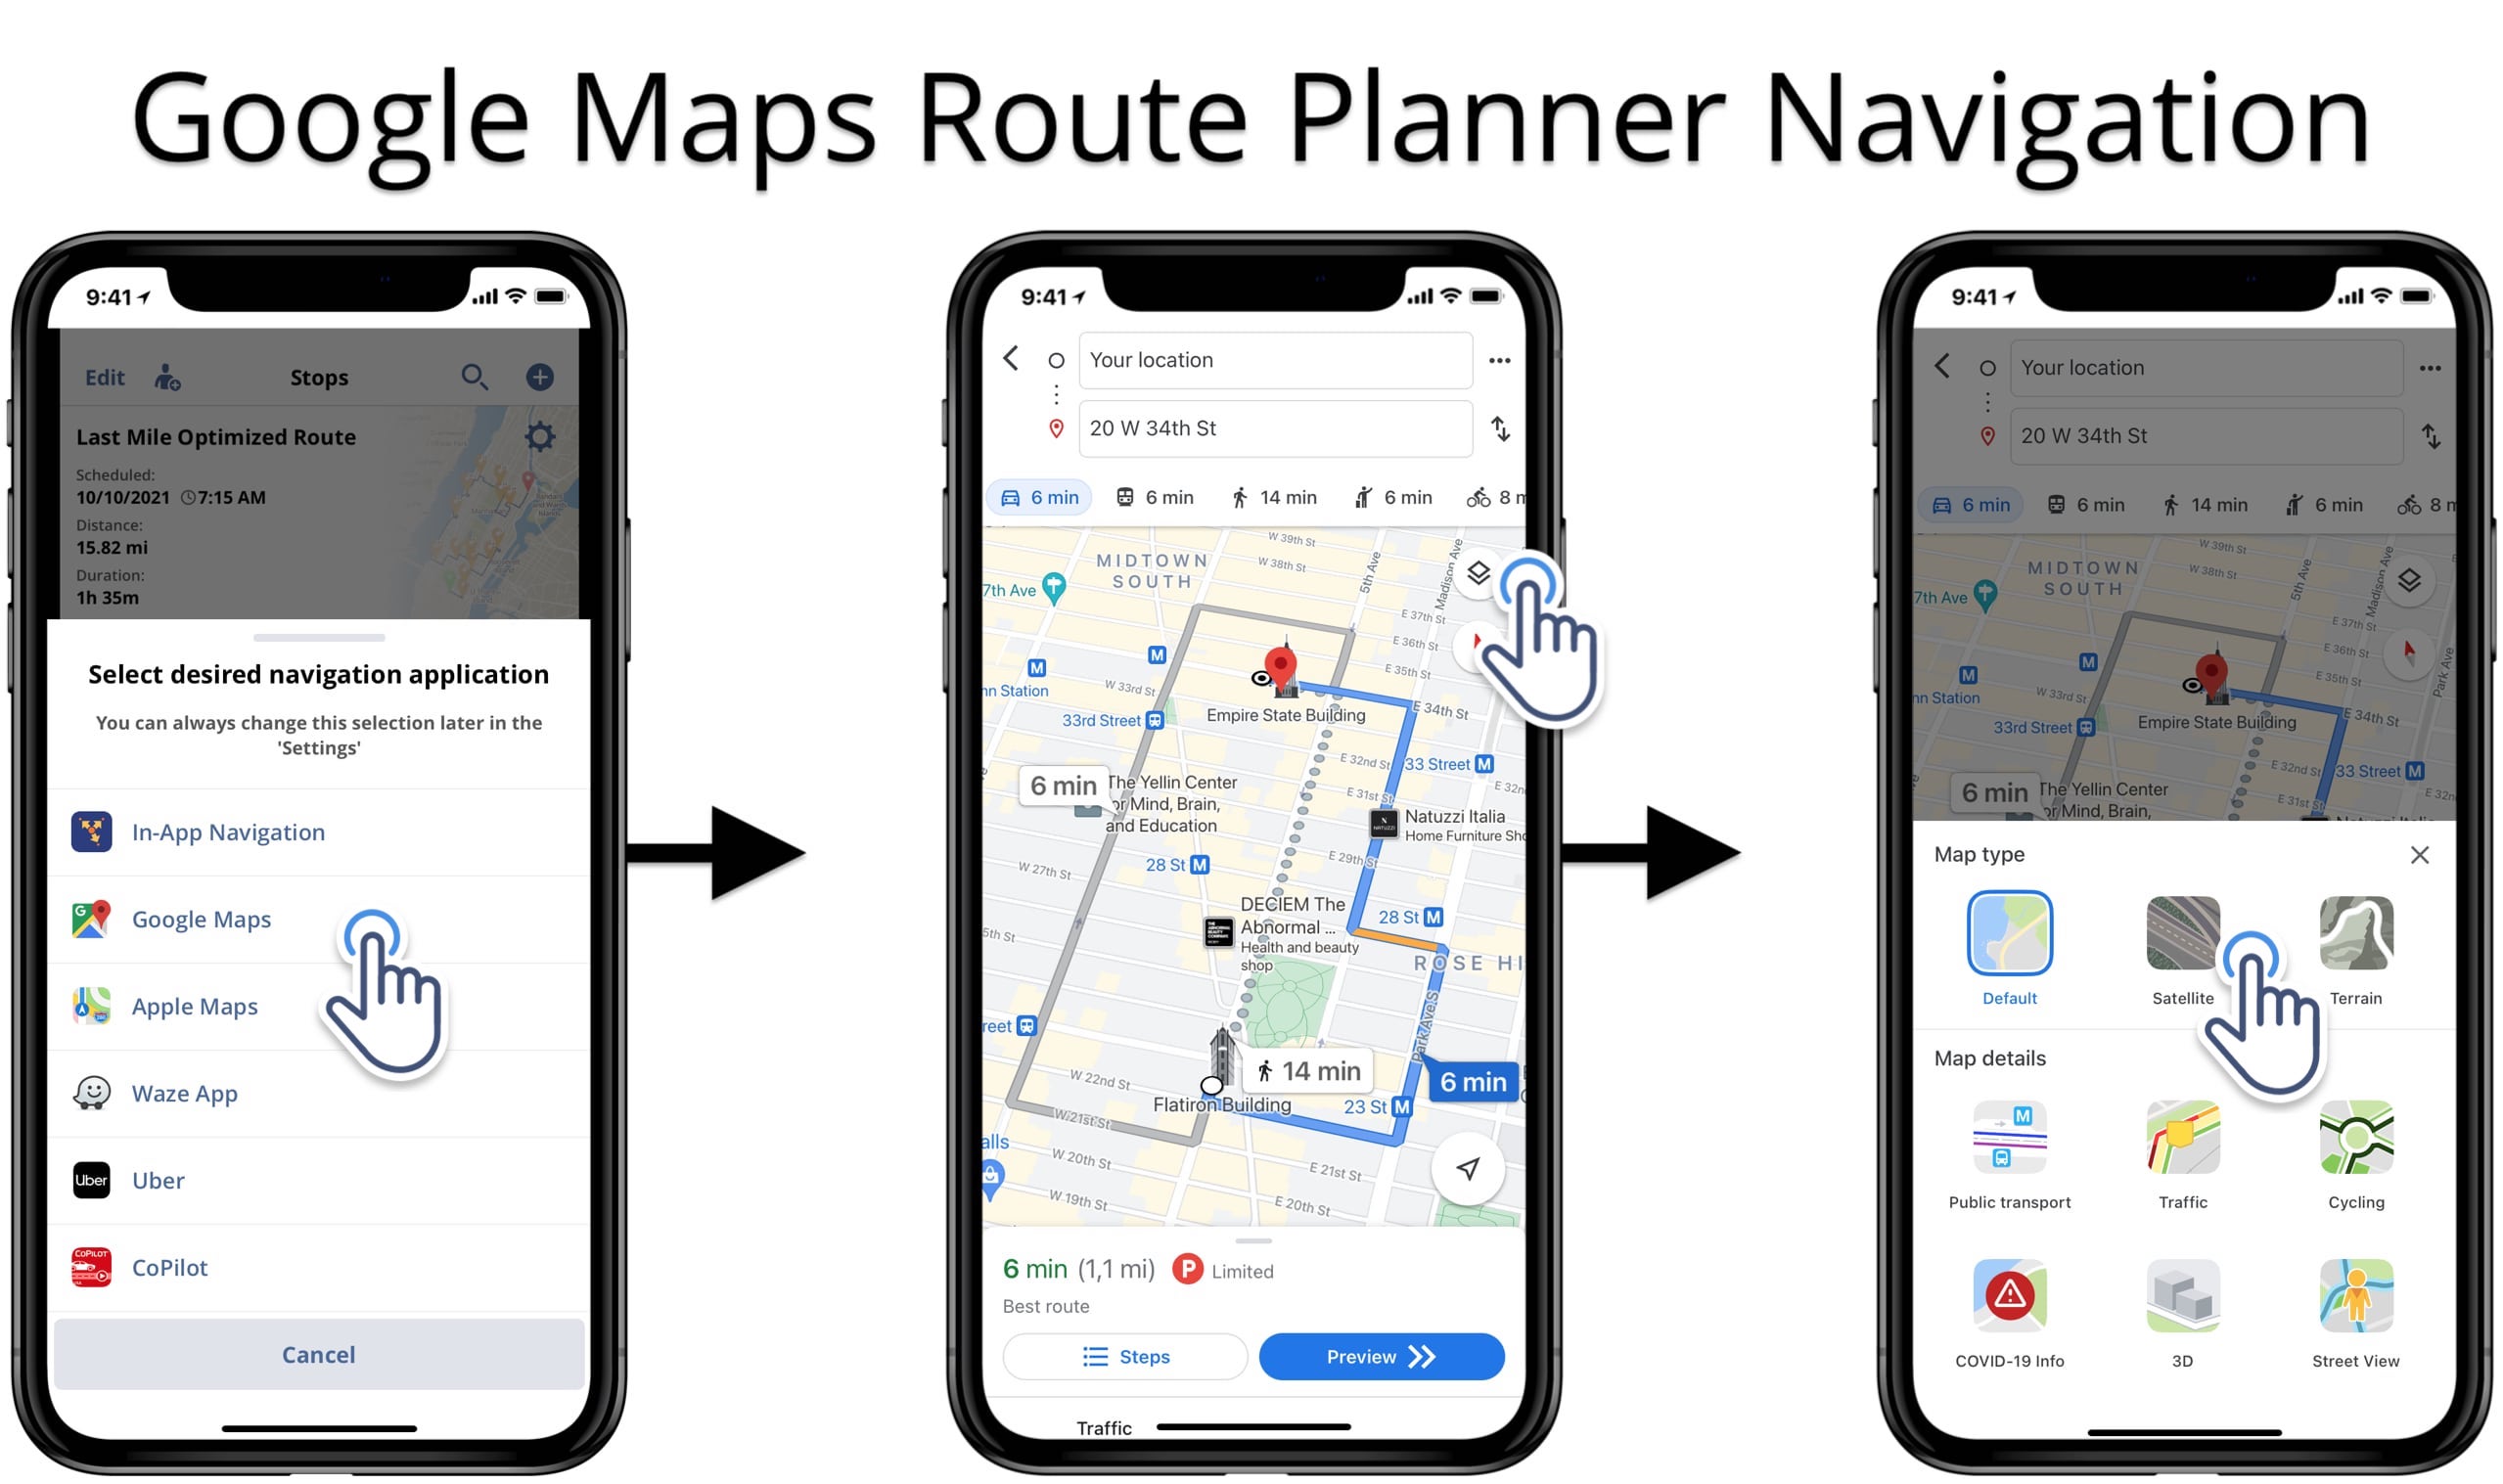 Google Maps route planner navigation with Google Maps satellite view of the map.